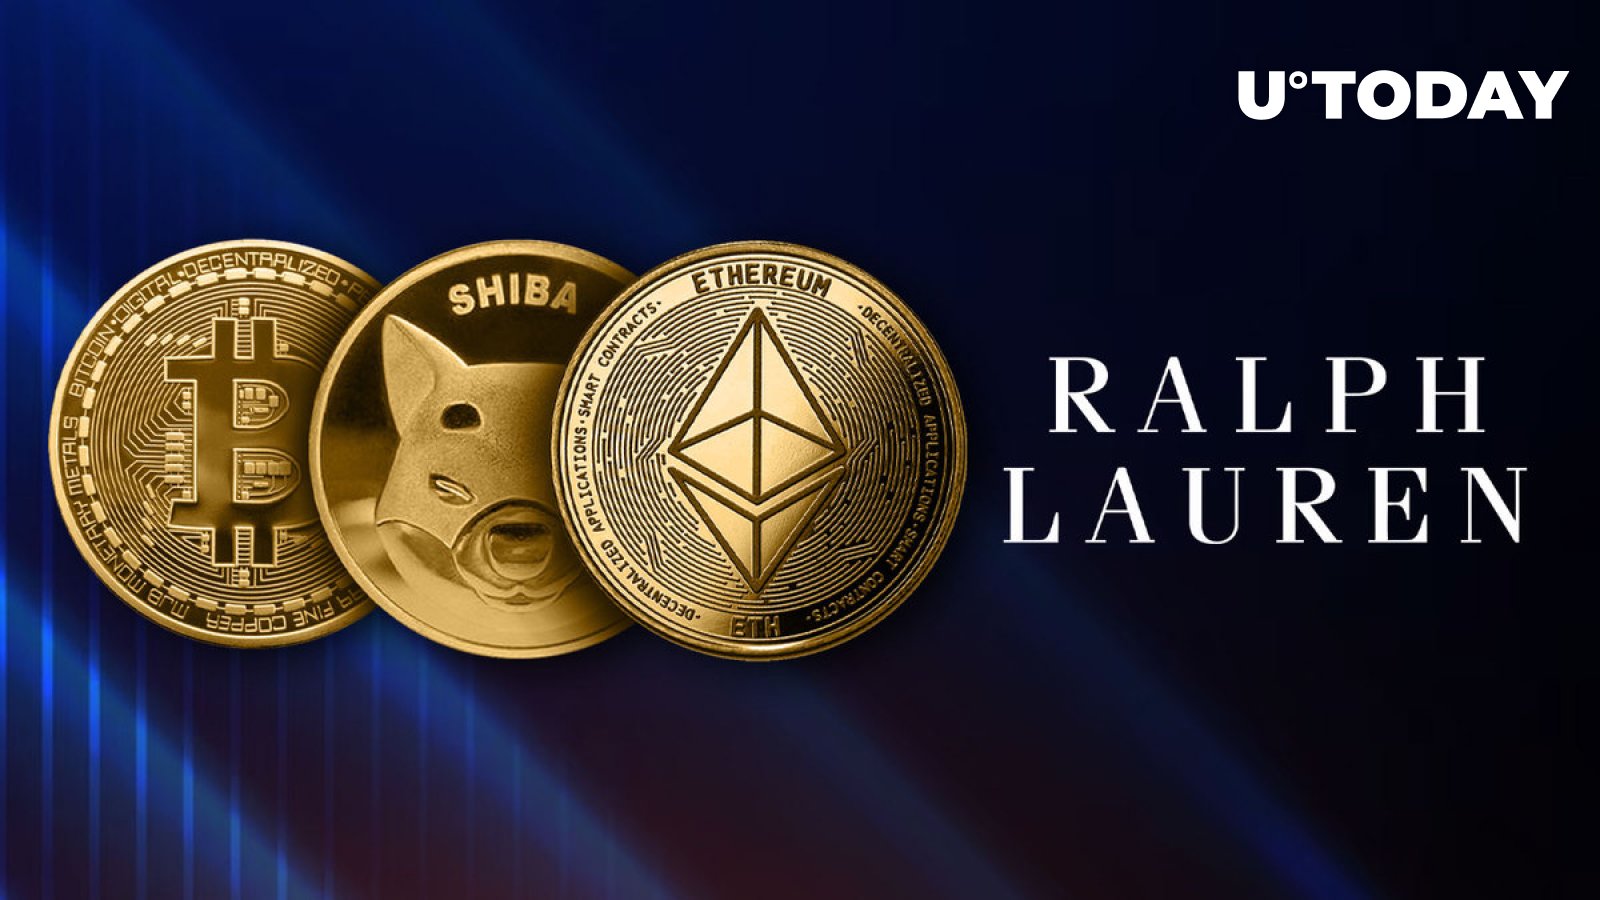 Luxury Brand Ralph Lauren Now Accepting Crypto Payments at Its New Miami  Store – Featured Bitcoin News